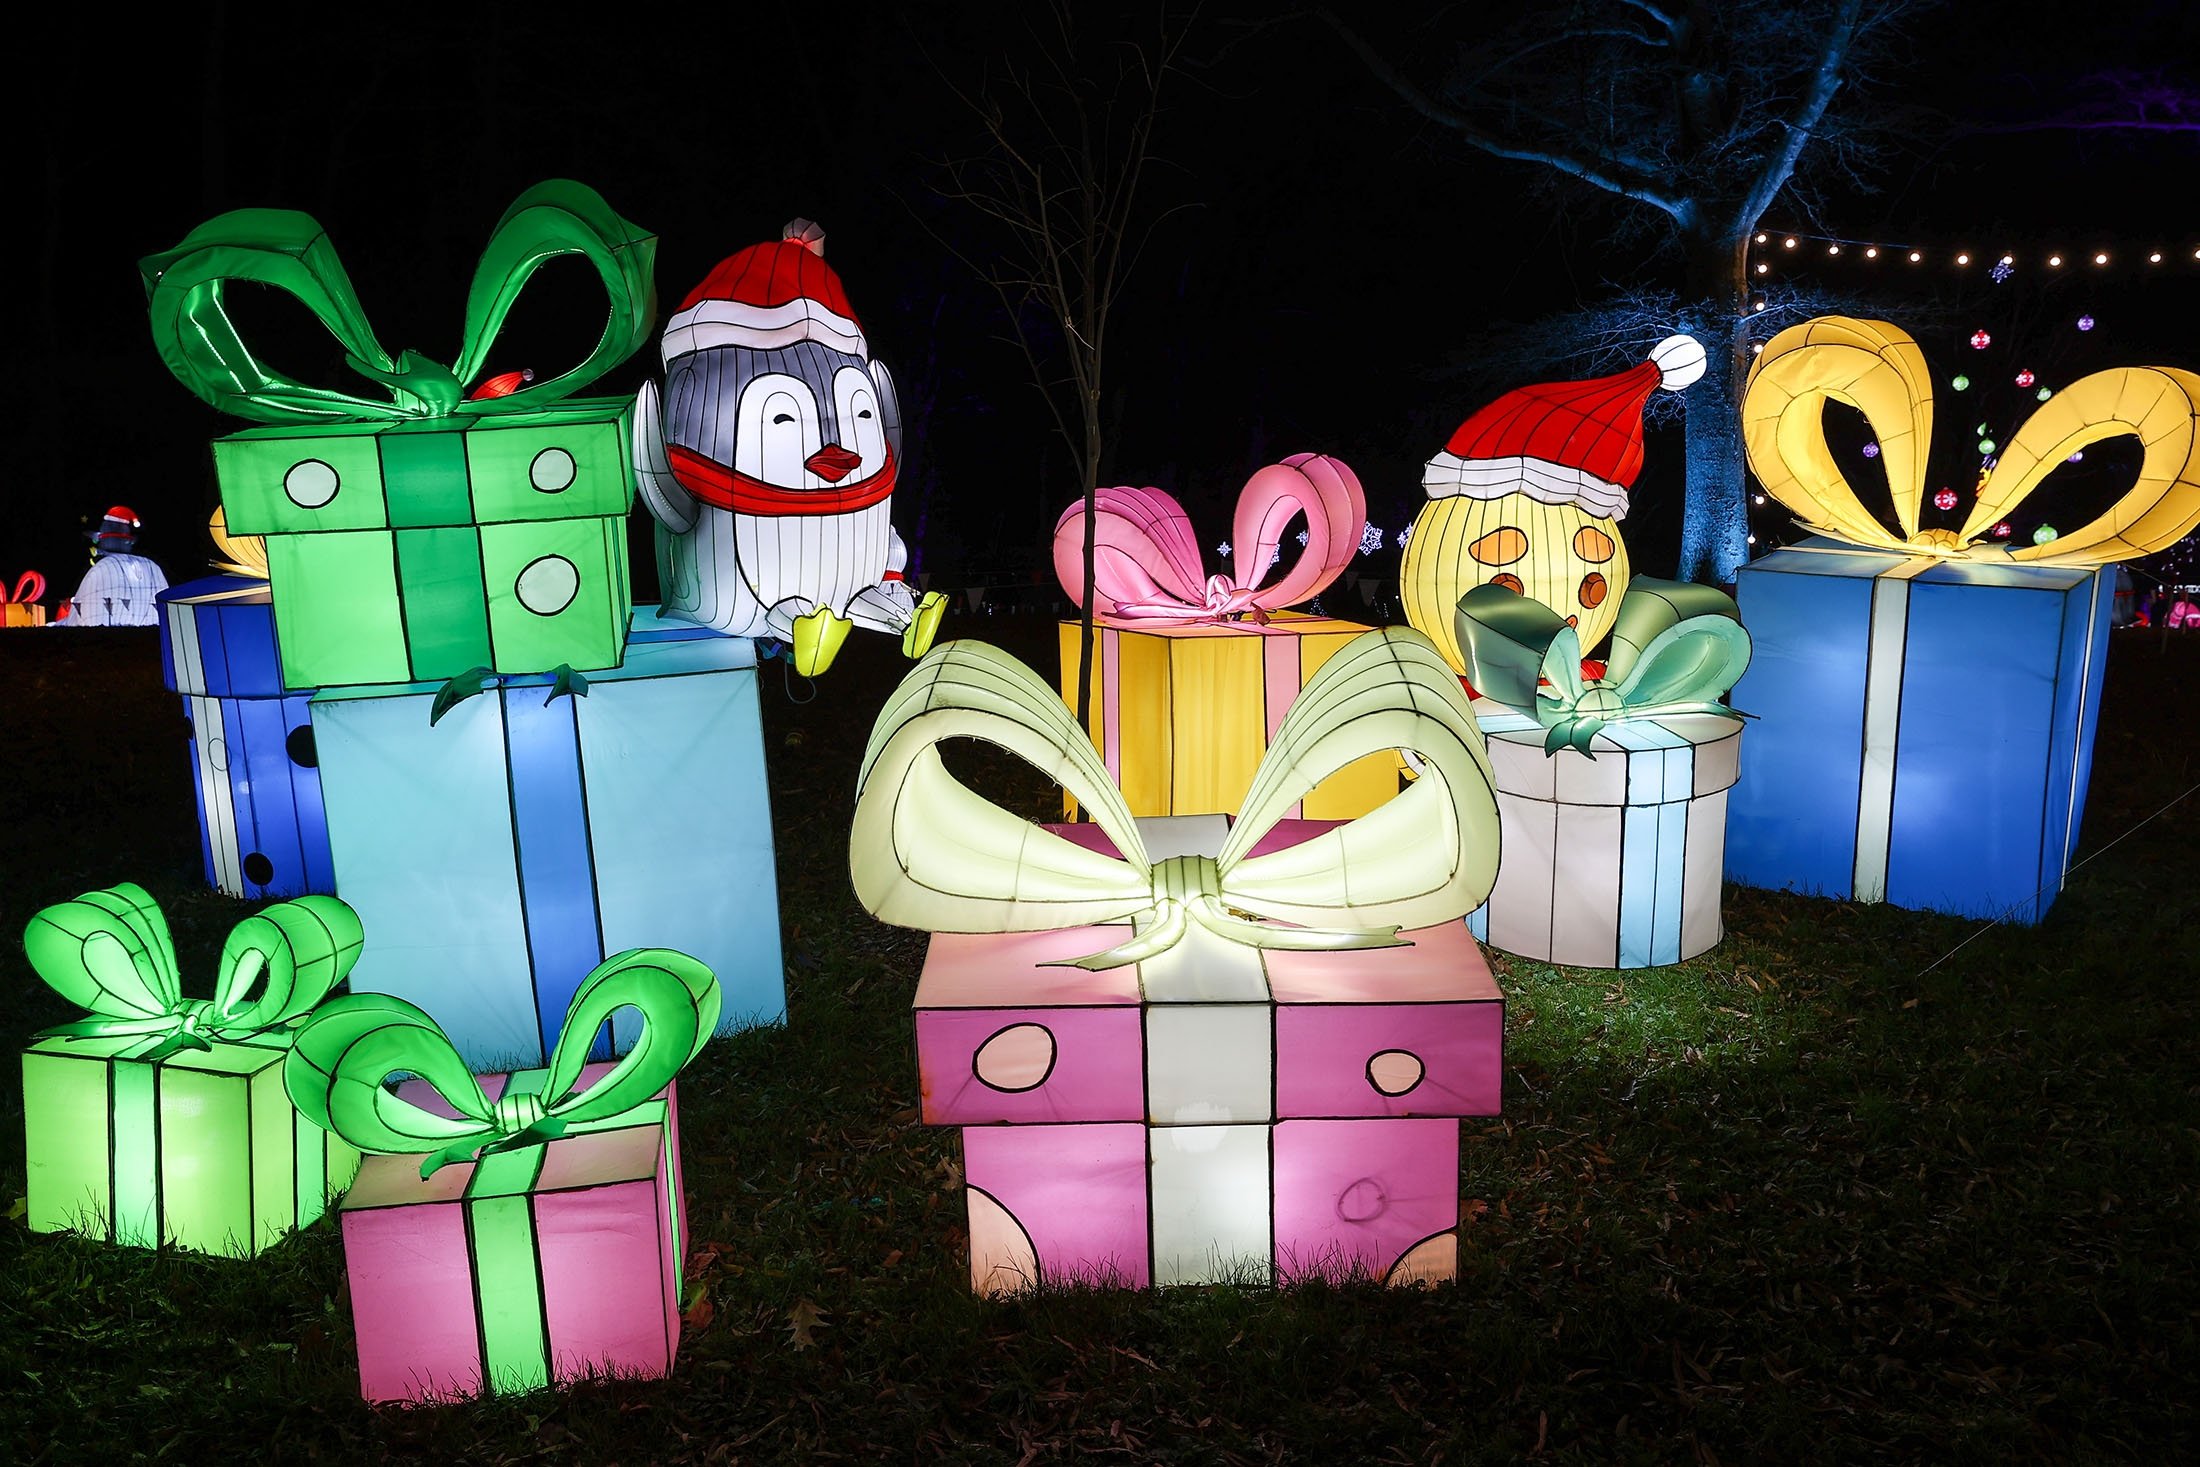 New York's Luminocity festival lights up with dreams and cuteness ...